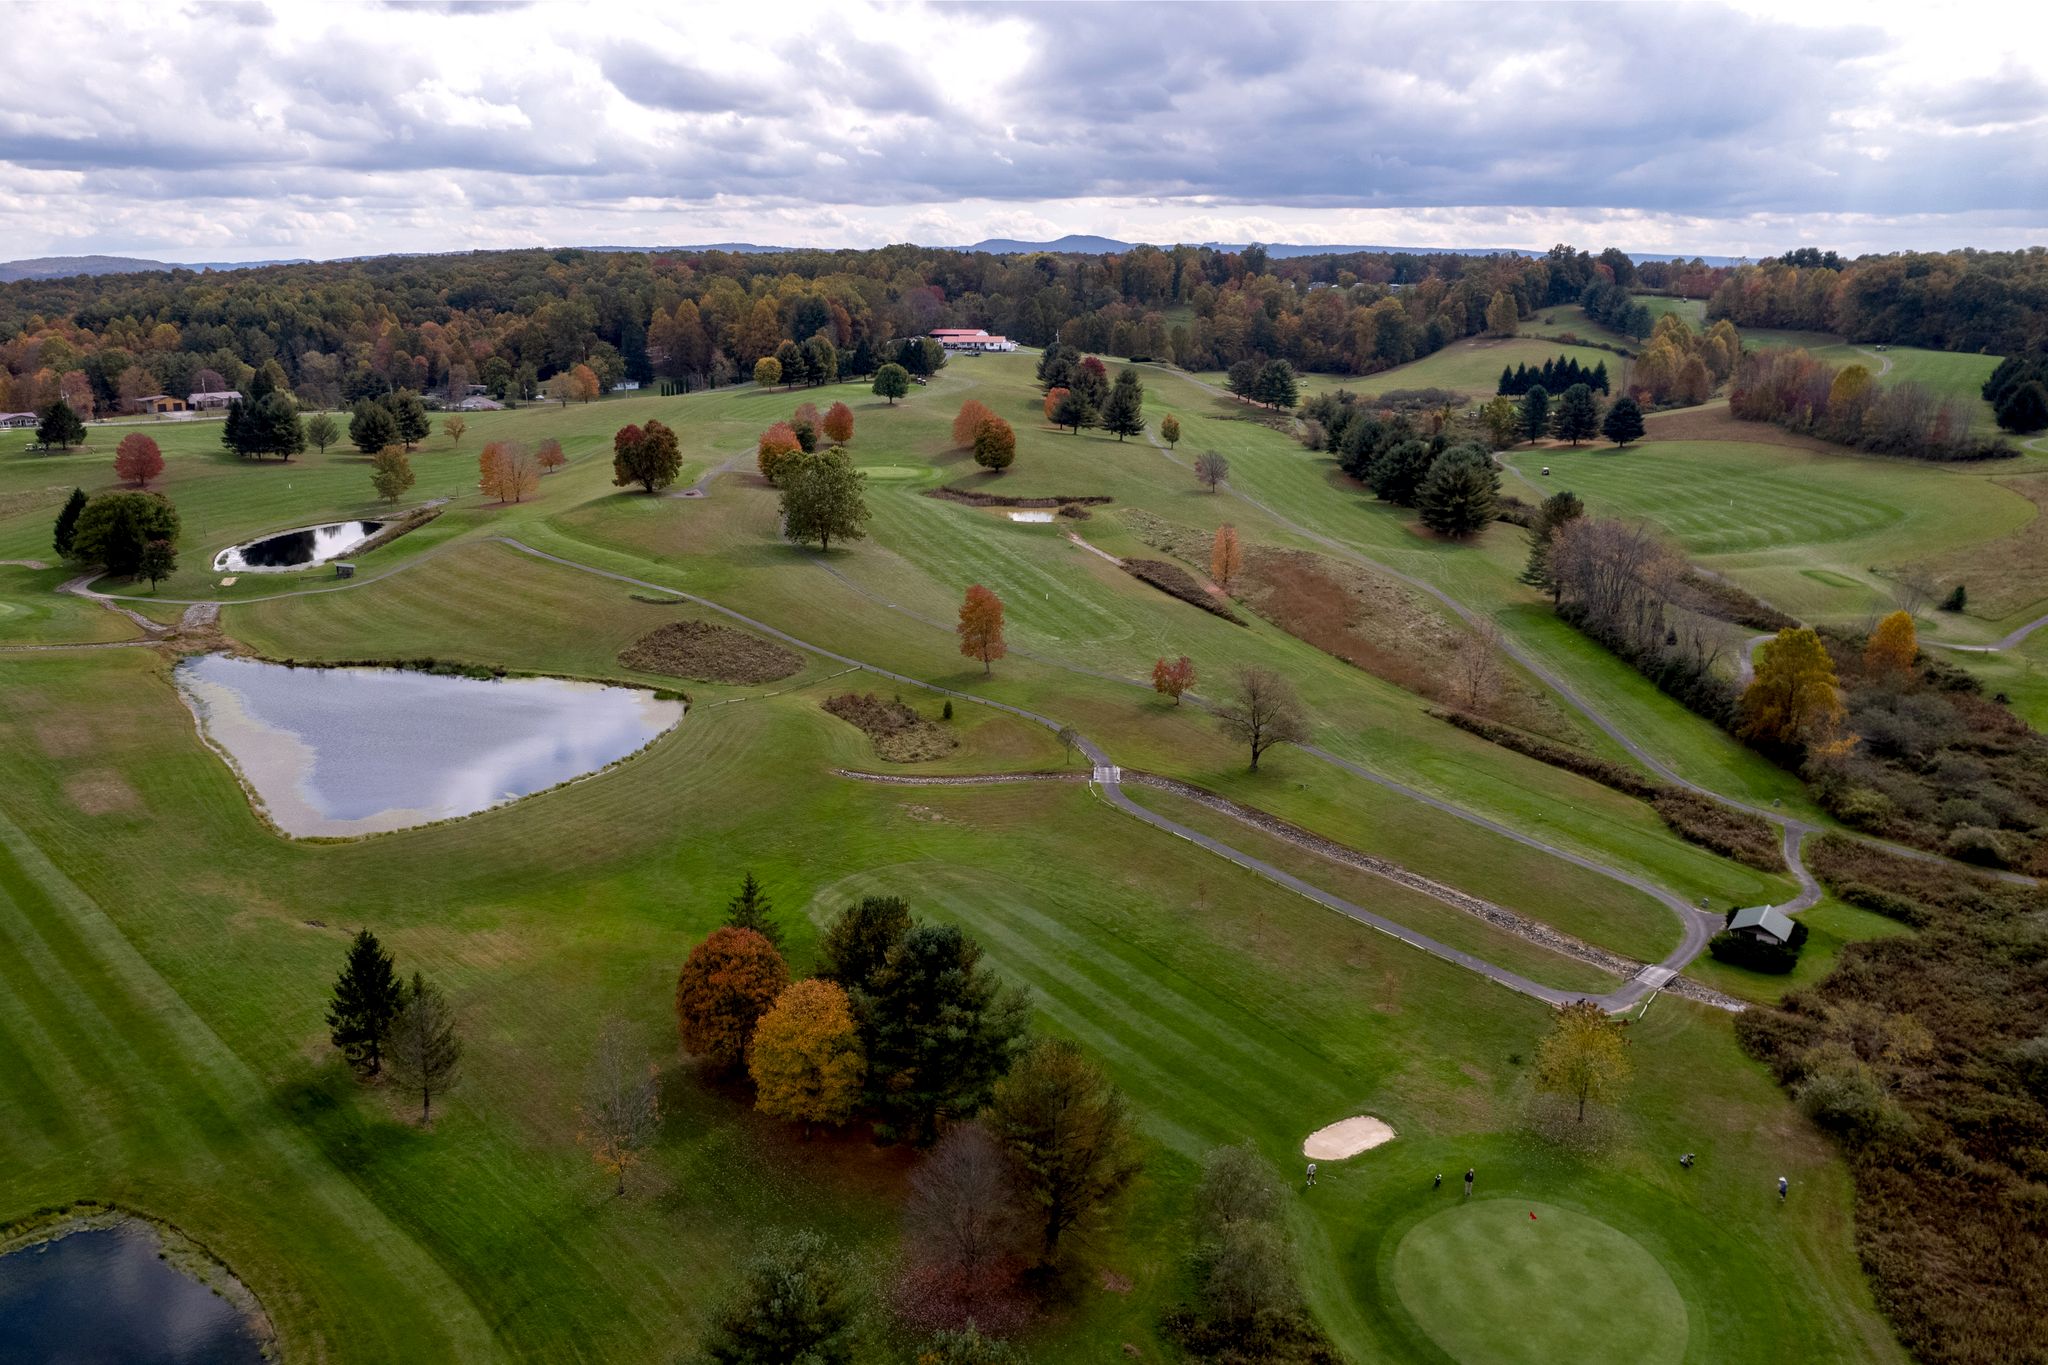 An aerial view of a golf course